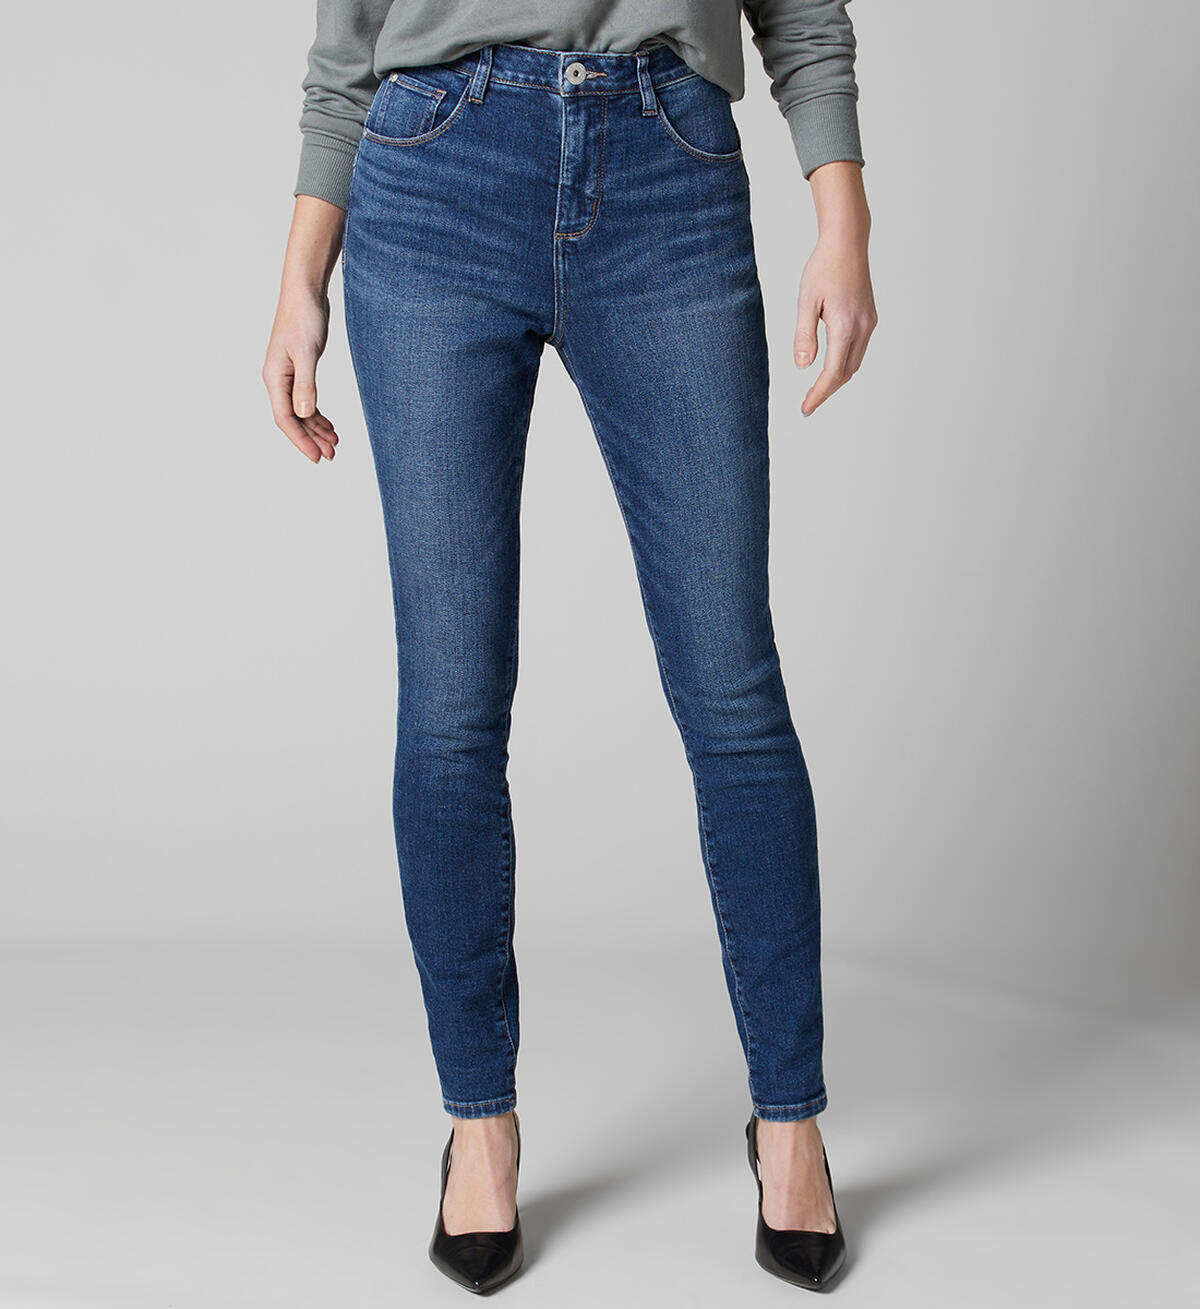 Cecilia High Rise Skinny Jeans - Sustainable Fabric, , hi-res image number 2